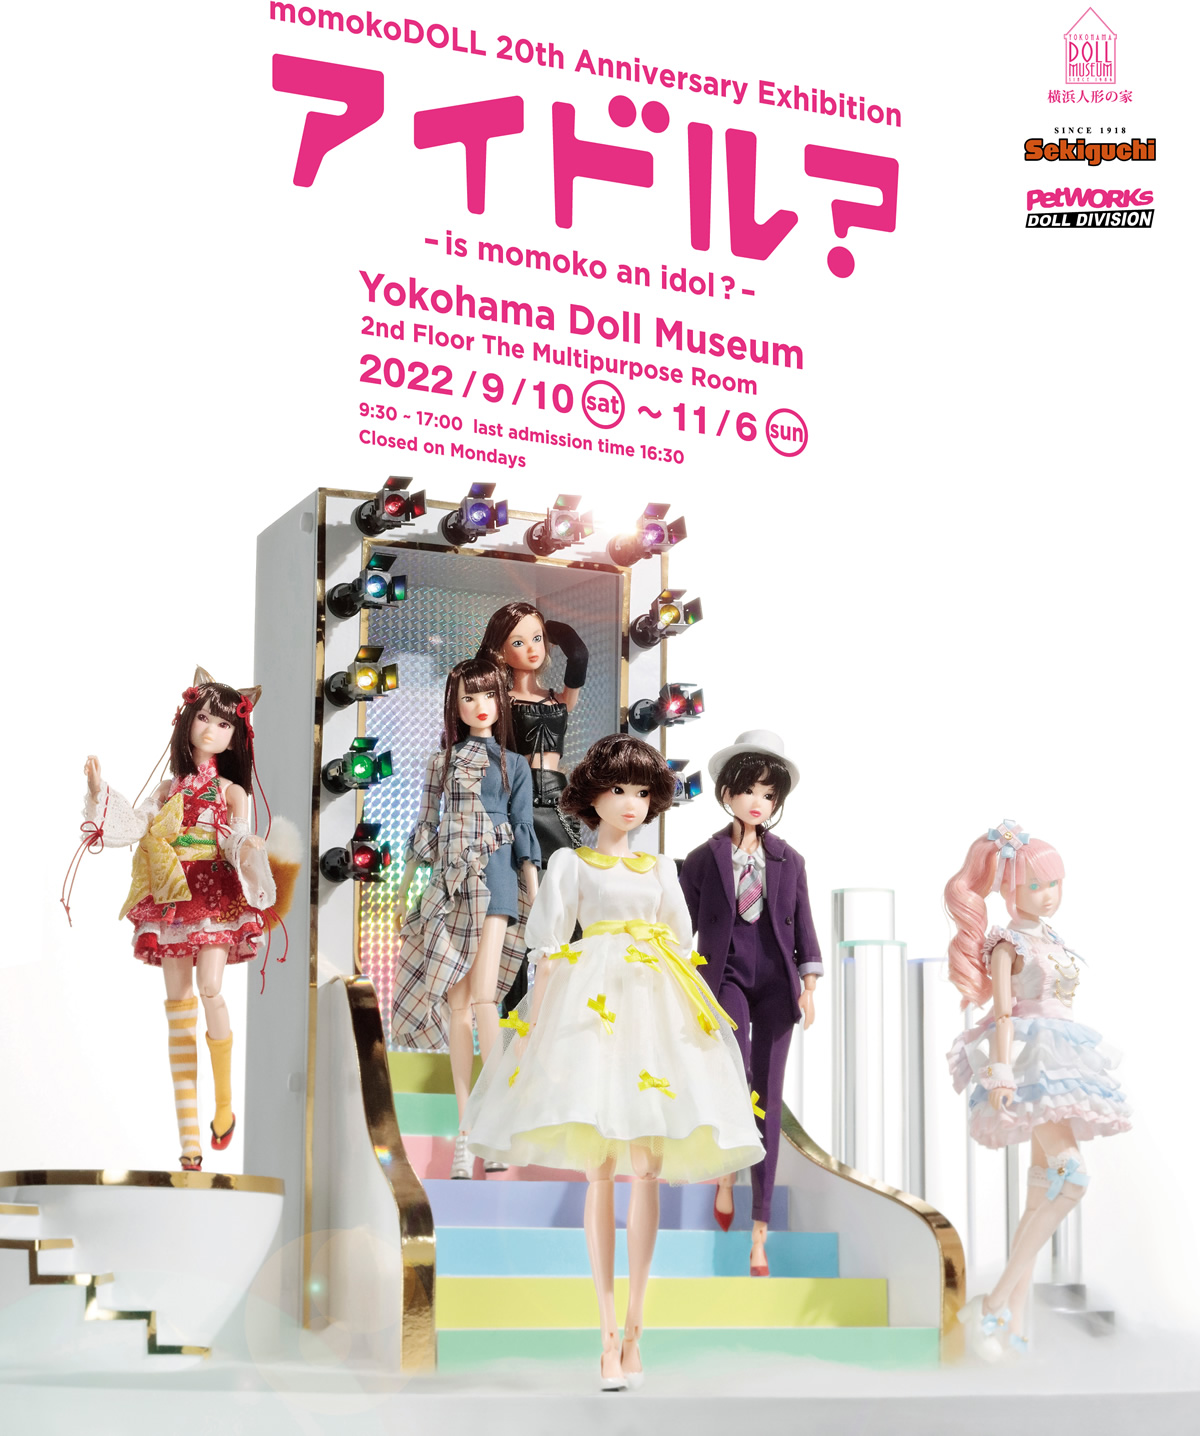 Autumn 2022.We will hold an event at Yokohama Doll Museum.The theme is Idol.